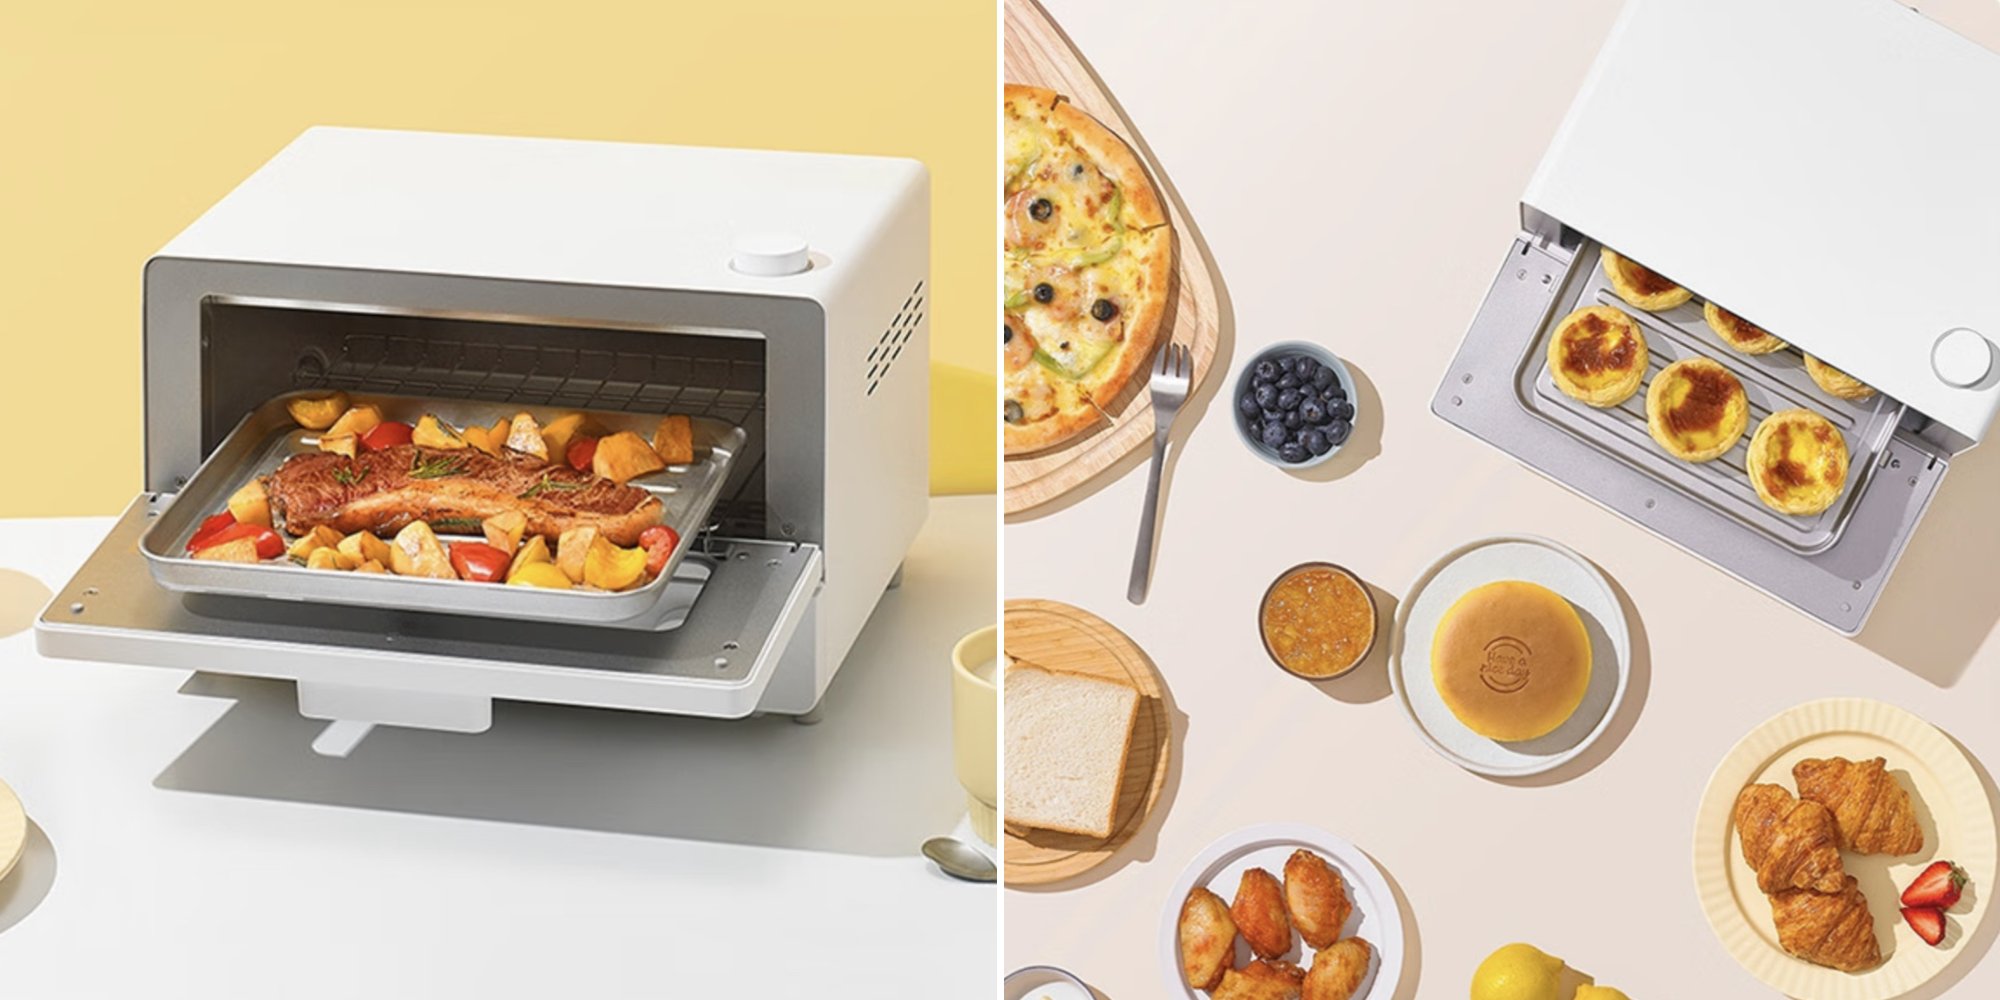 Xiaomi has introduced a tiny budget oven